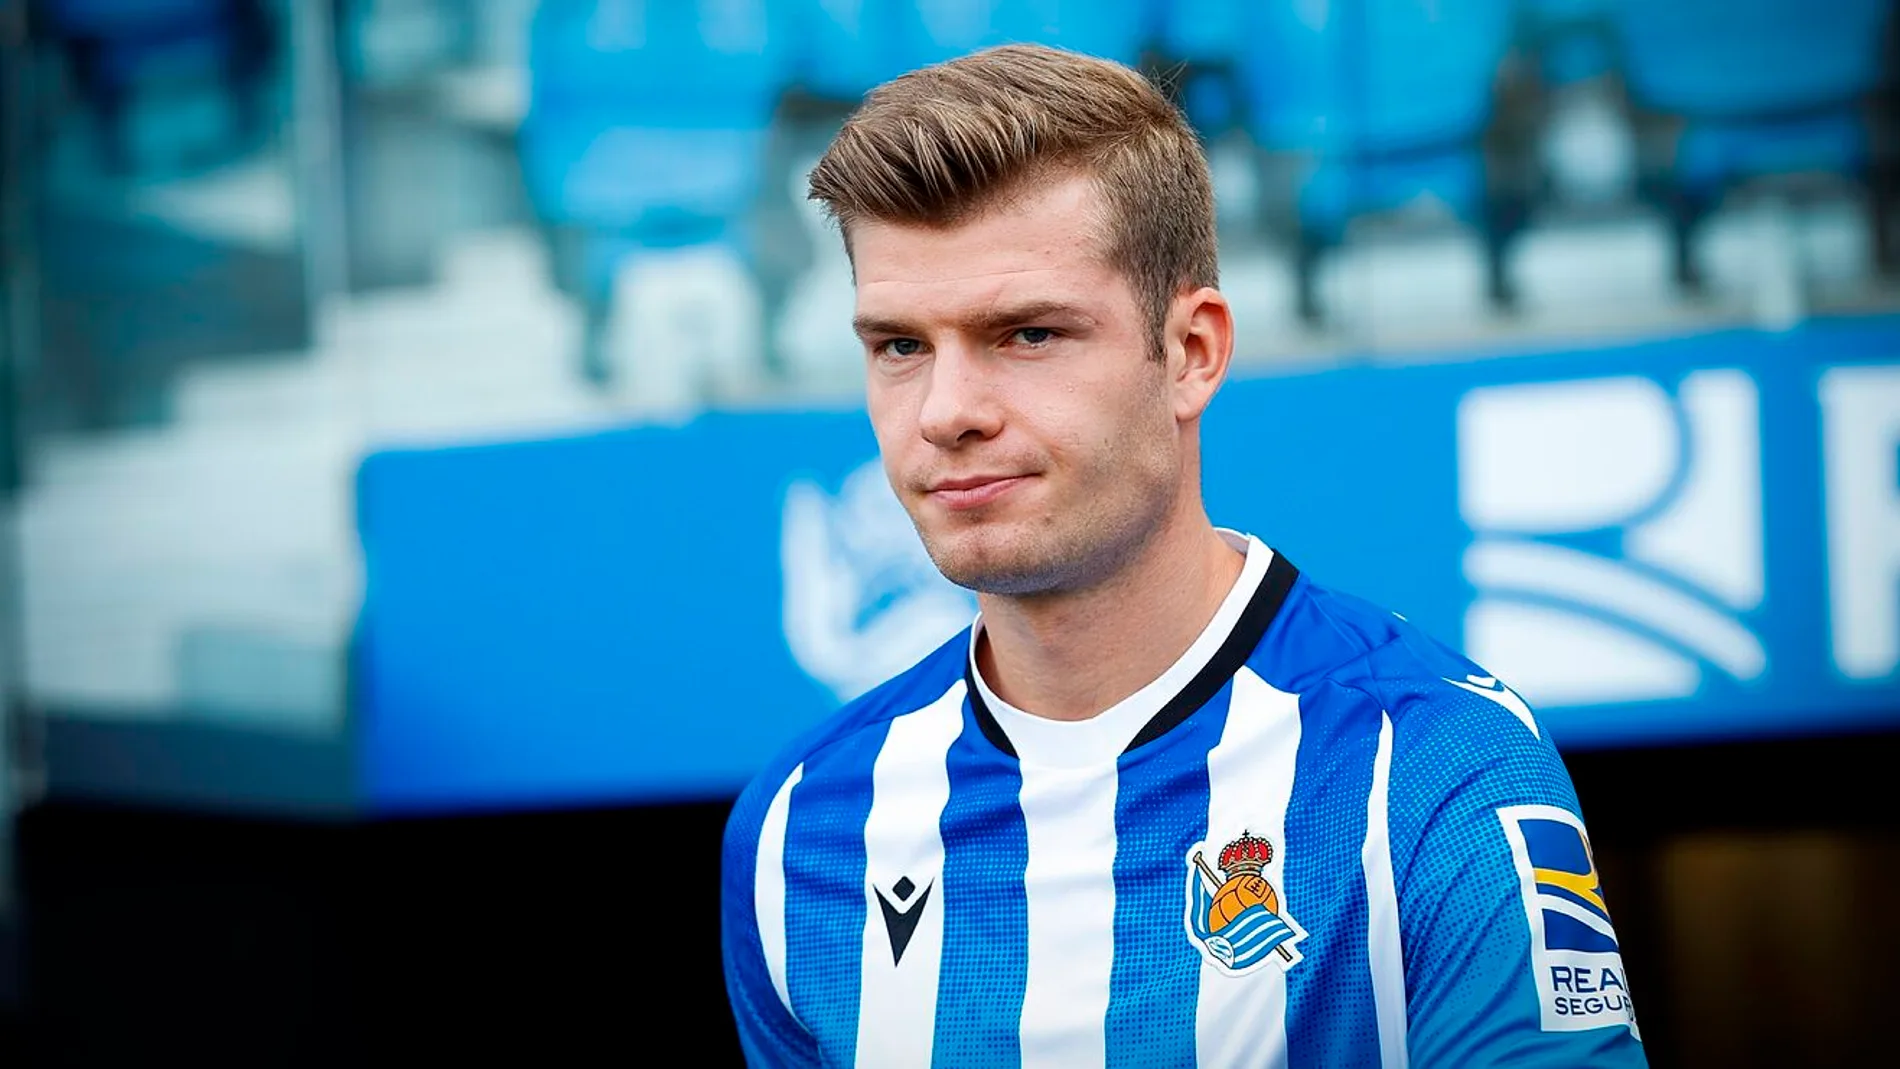 Real Sociedad gets into trouble to sign Sorloth as property
